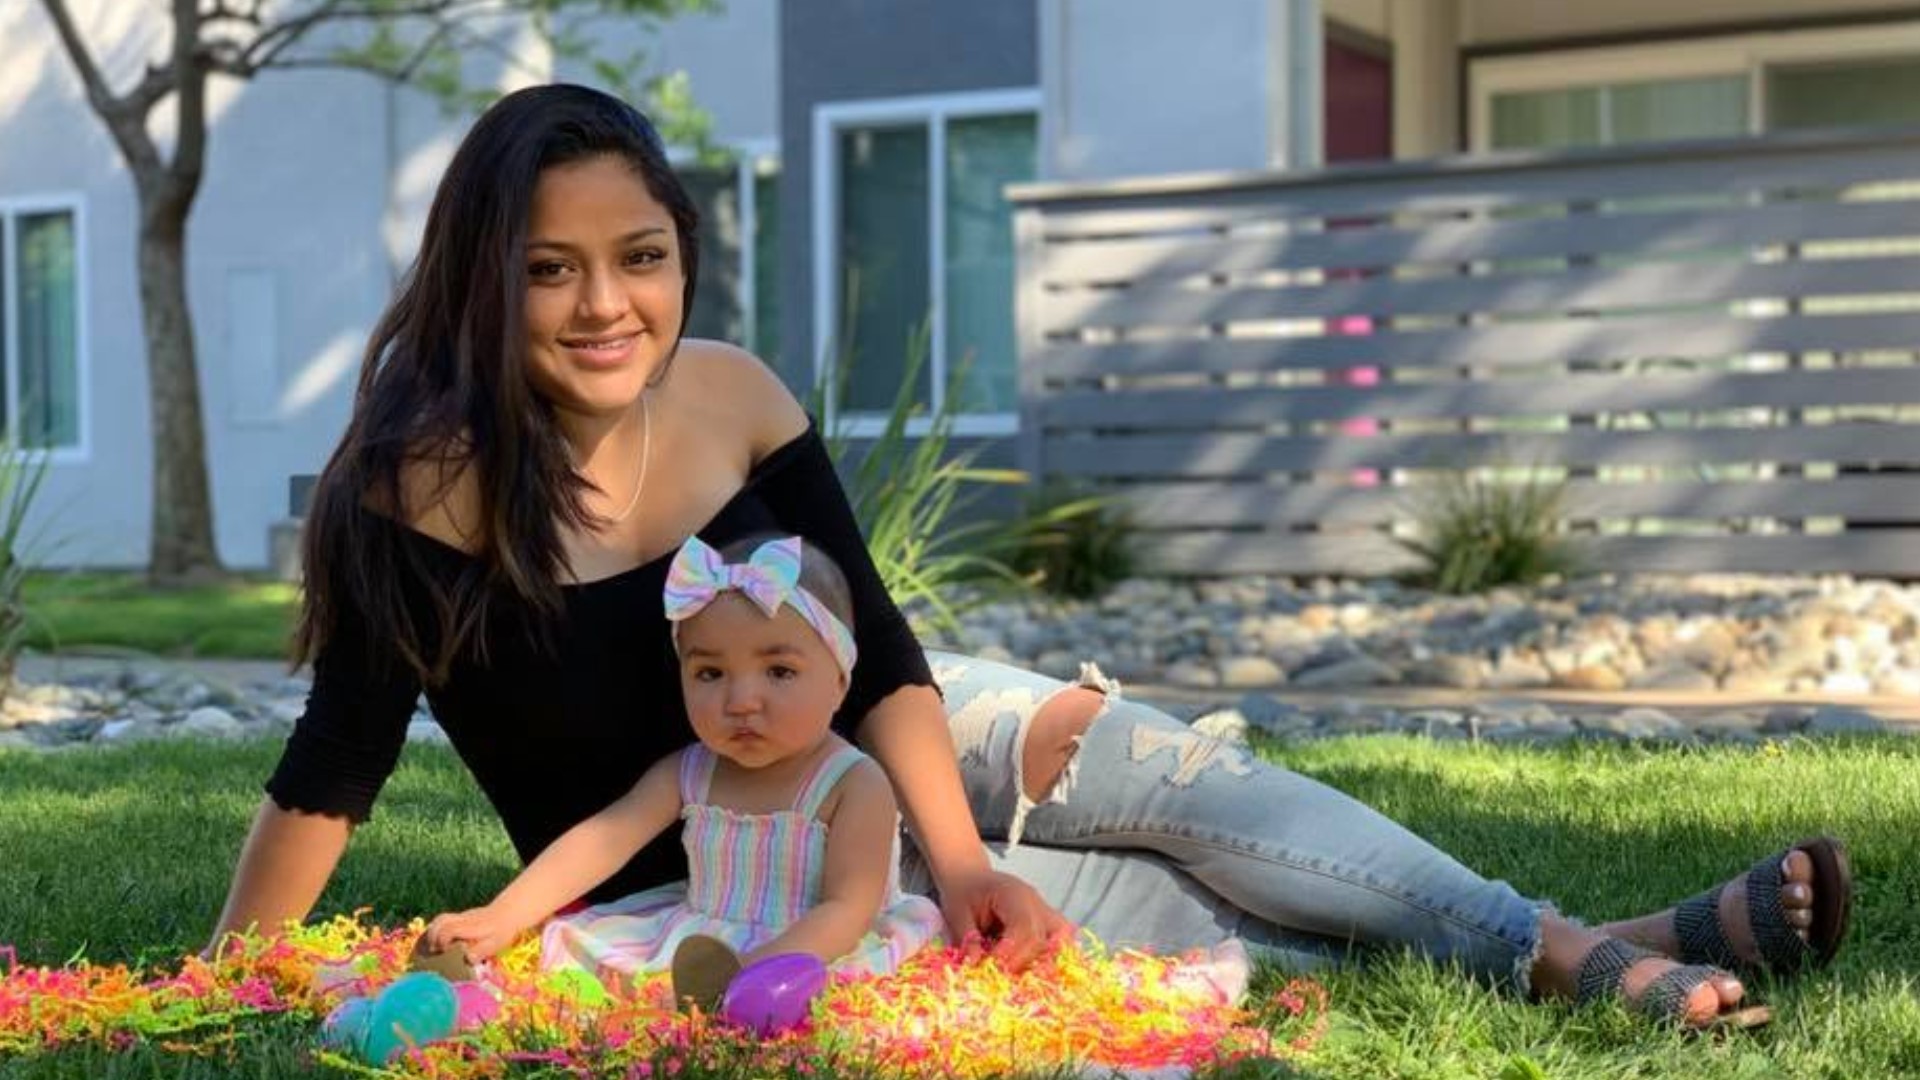 Alexia Rose Echeverria's body was found by a dumpster in Southern California. She was 8 months old and her father is a person of interest in the death.